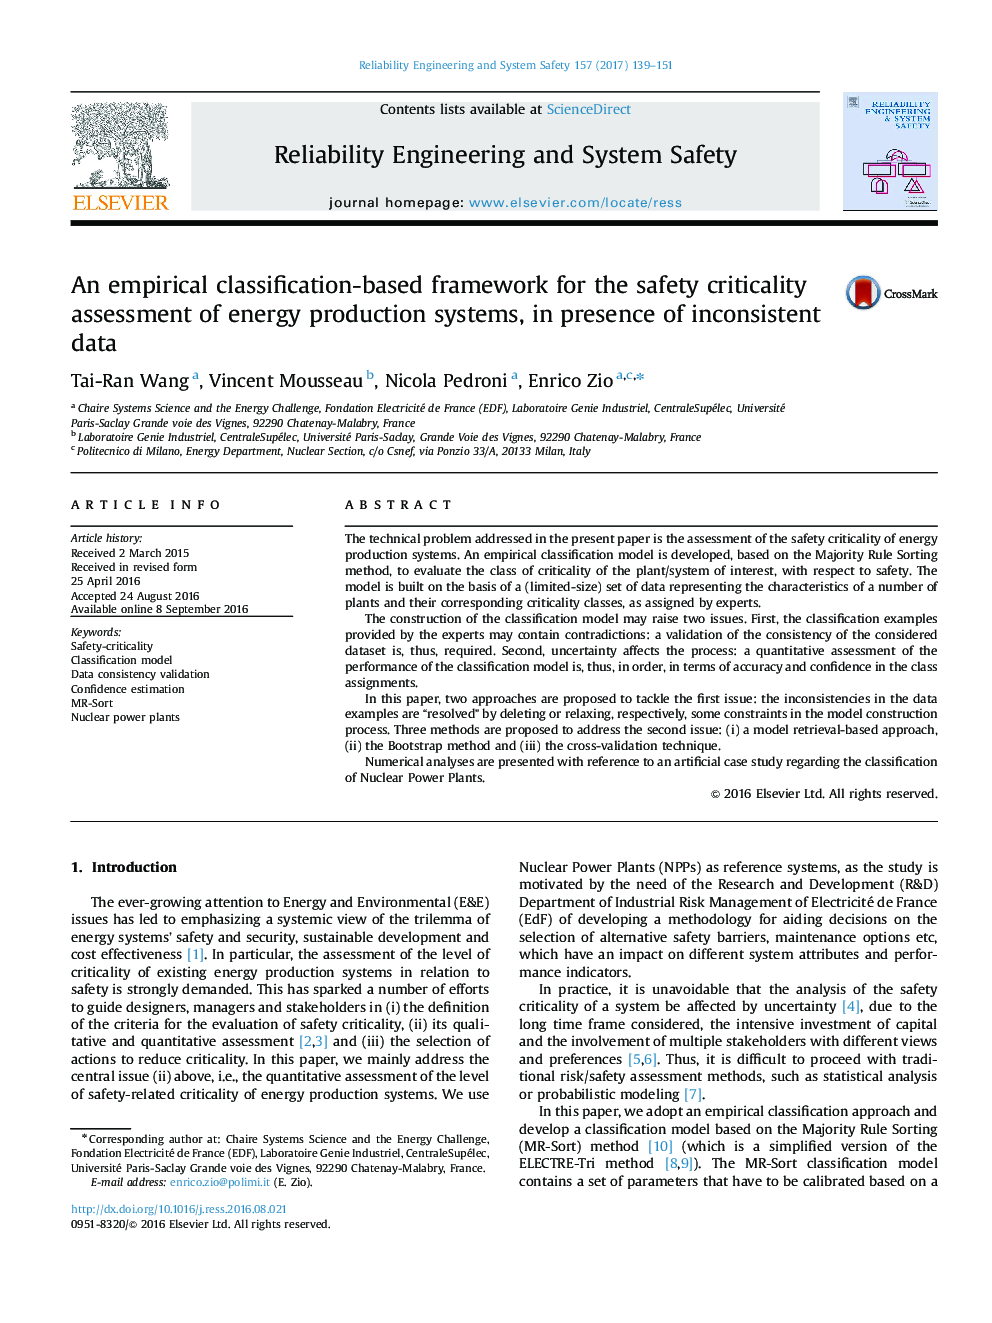 An empirical classification-based framework for the safety criticality assessment of energy production systems, in presence of inconsistent data